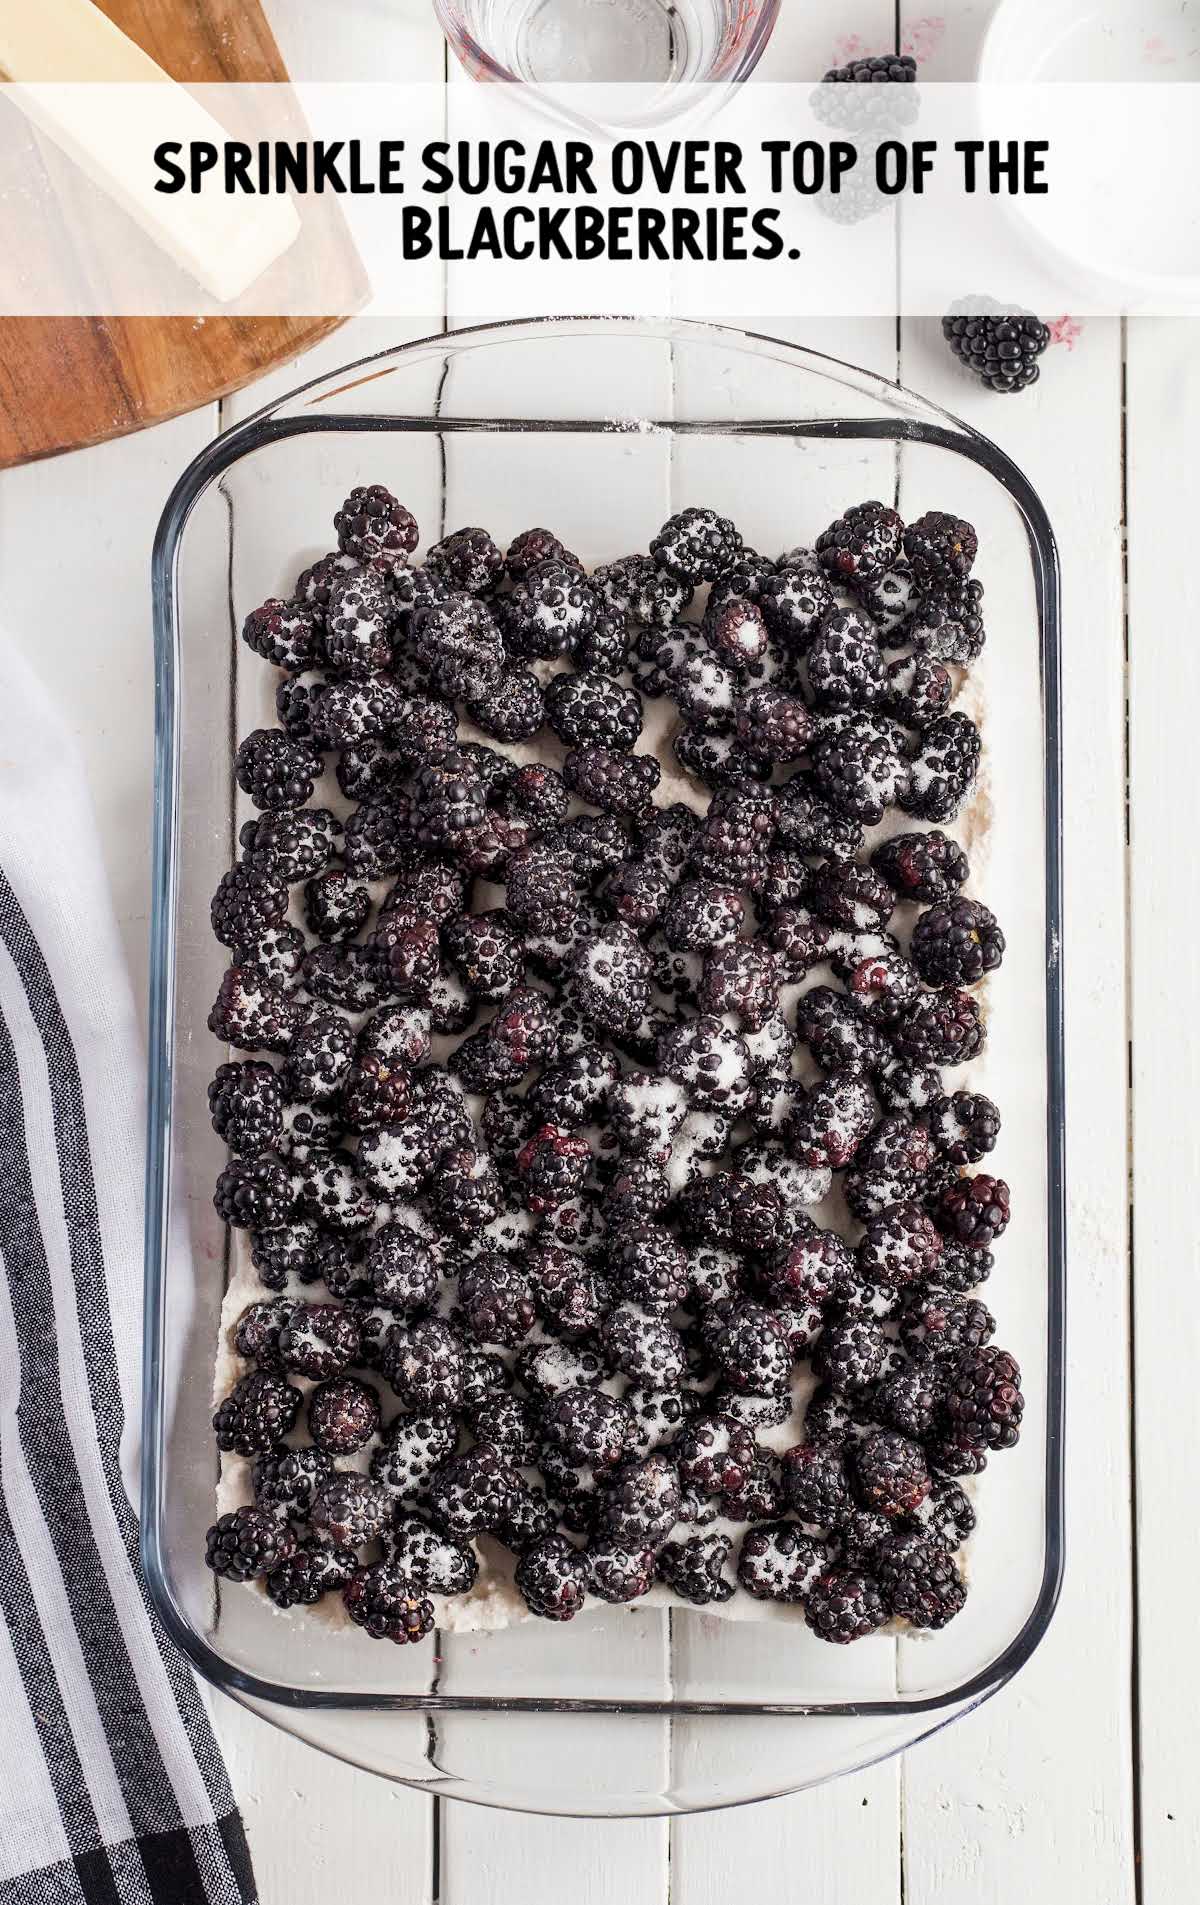 blackberries with sugar sprinkled on top in a baking dish